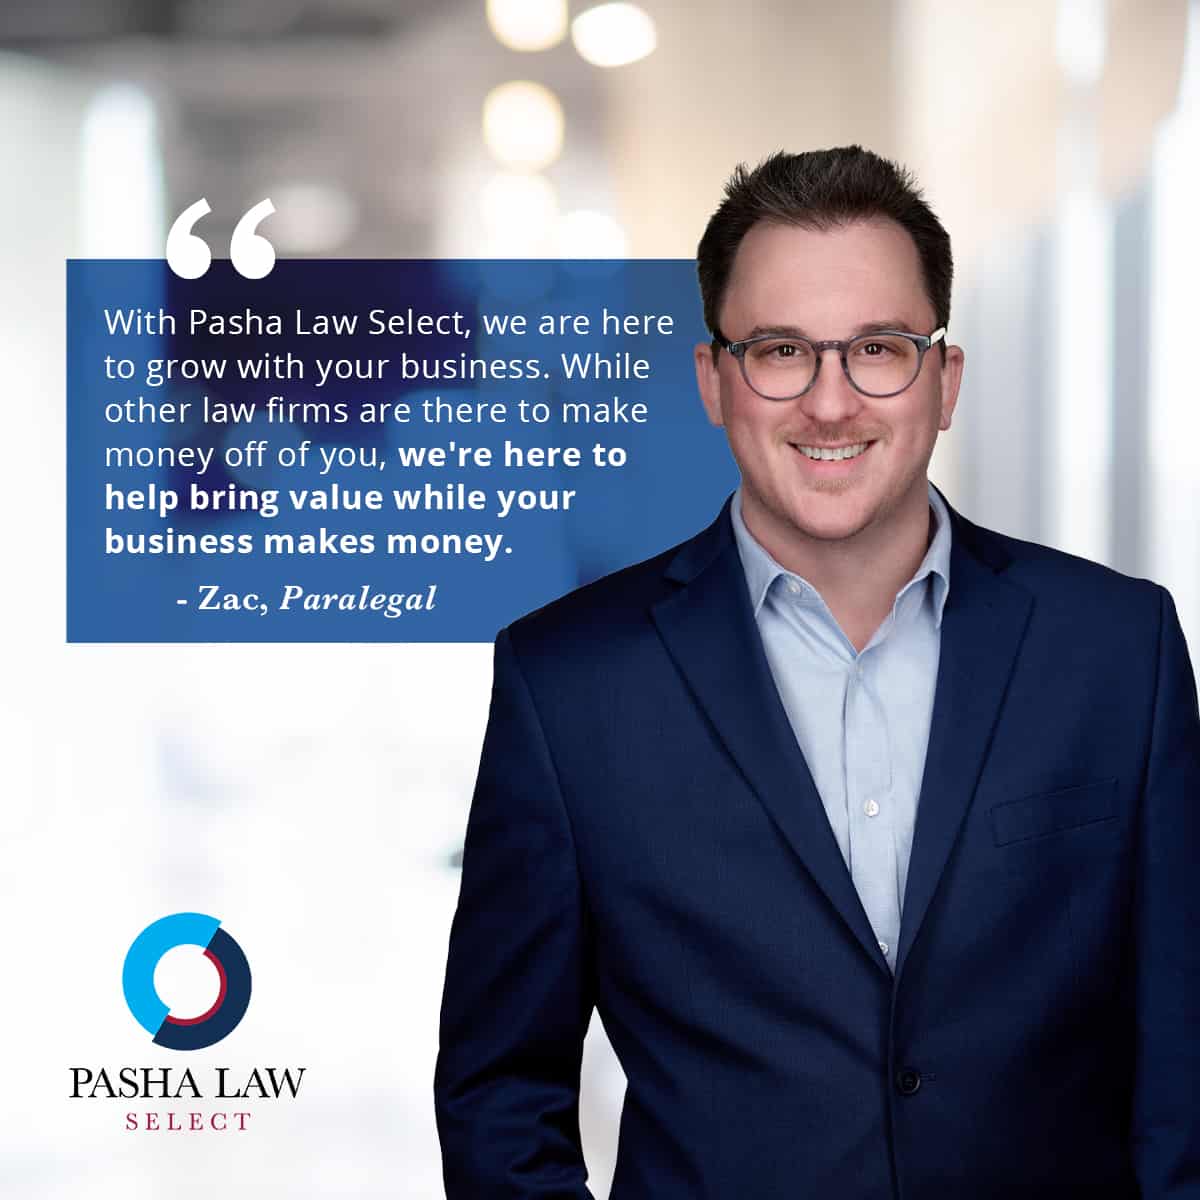 Paralegal Zac Rader is wearing a dark blue suit jacket and glasses and smiles at the camera. He is quoted, “With Pasha Law Select, we are here to grow with your business.”